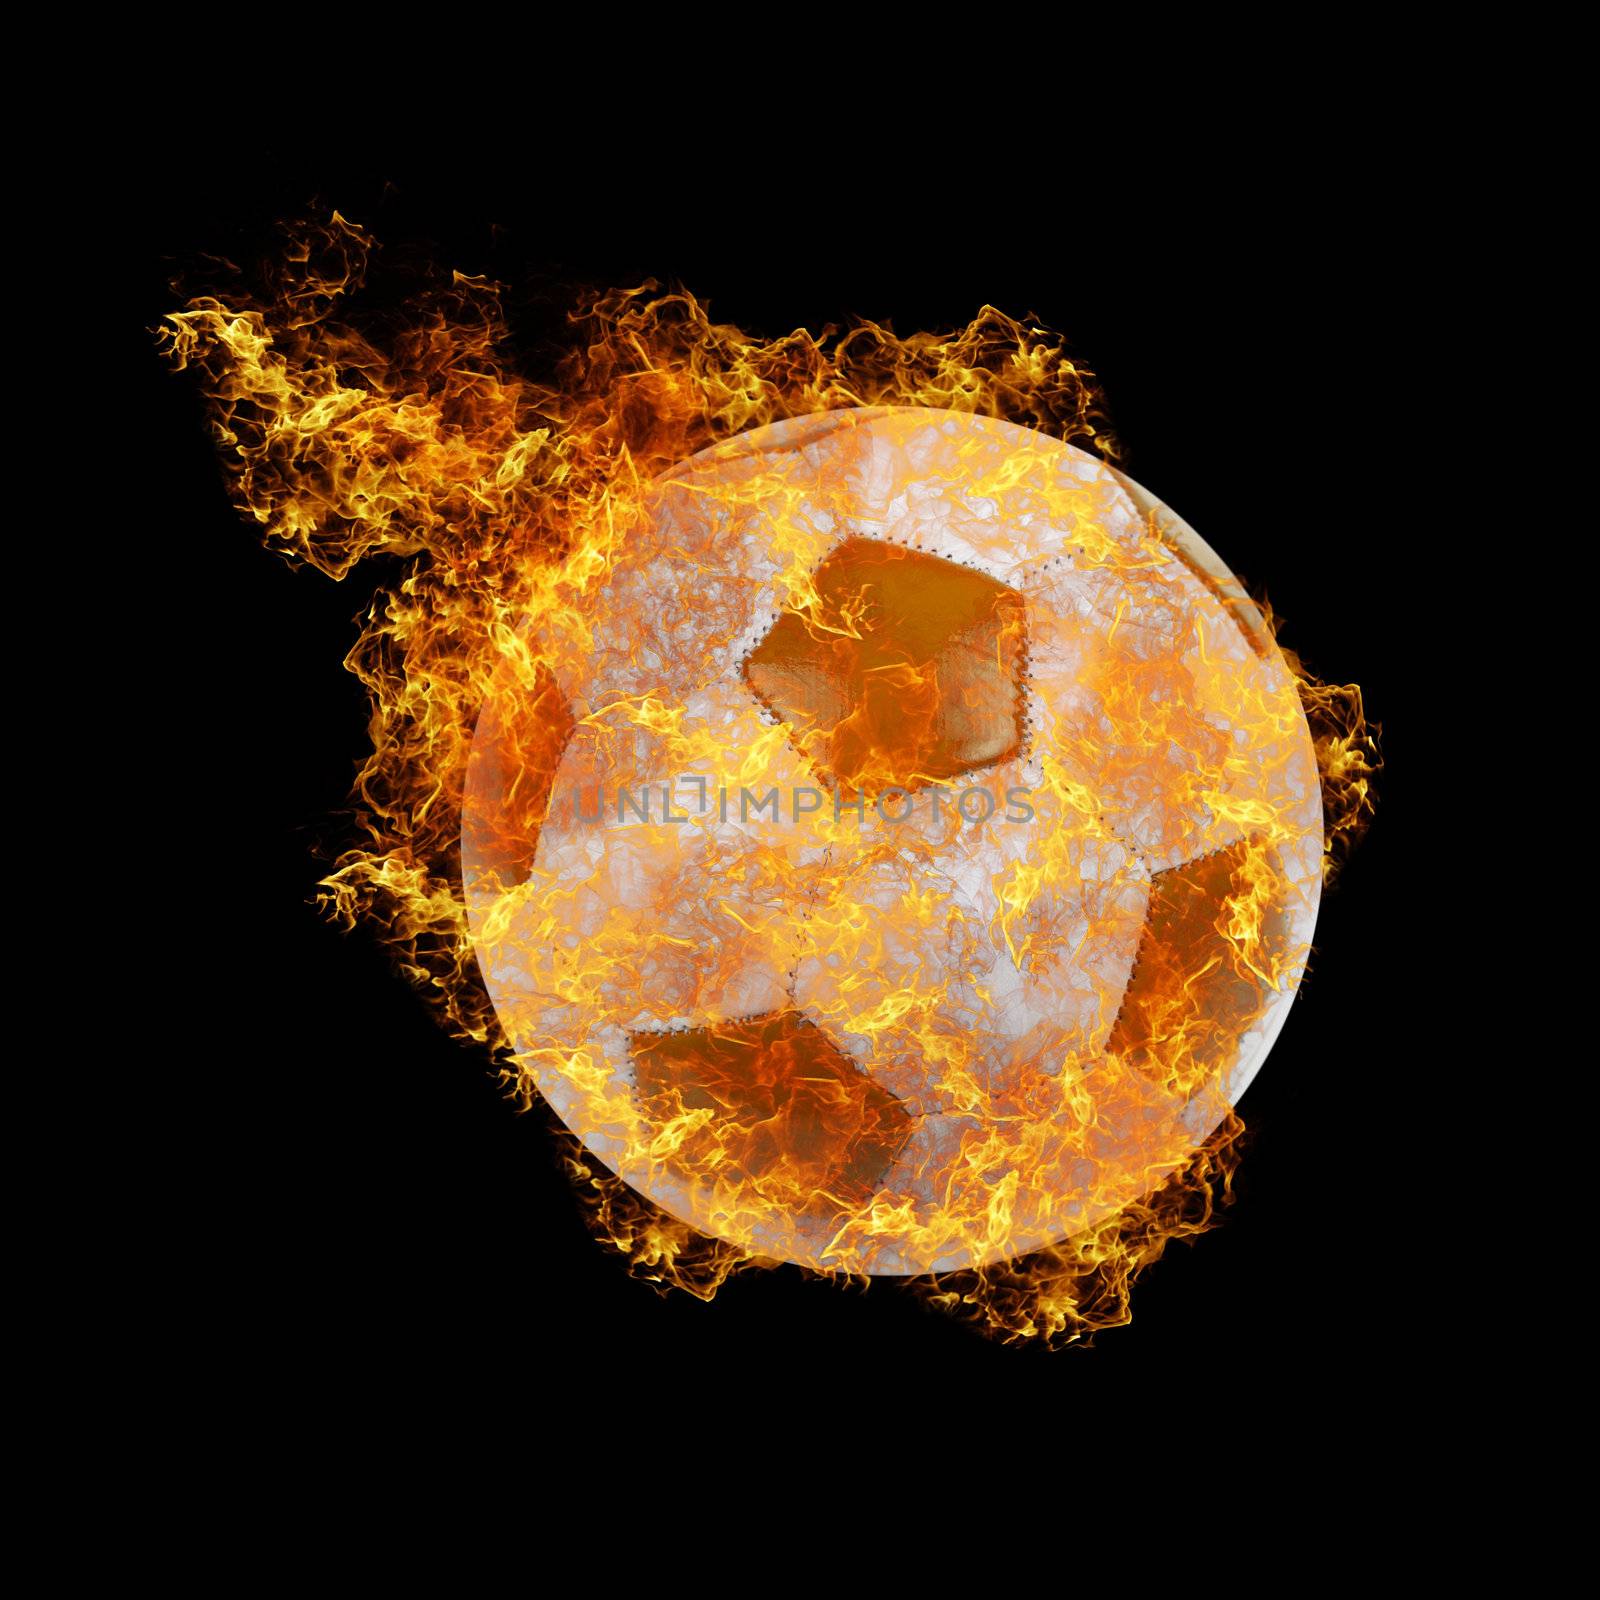 soccer ball on a black fire background